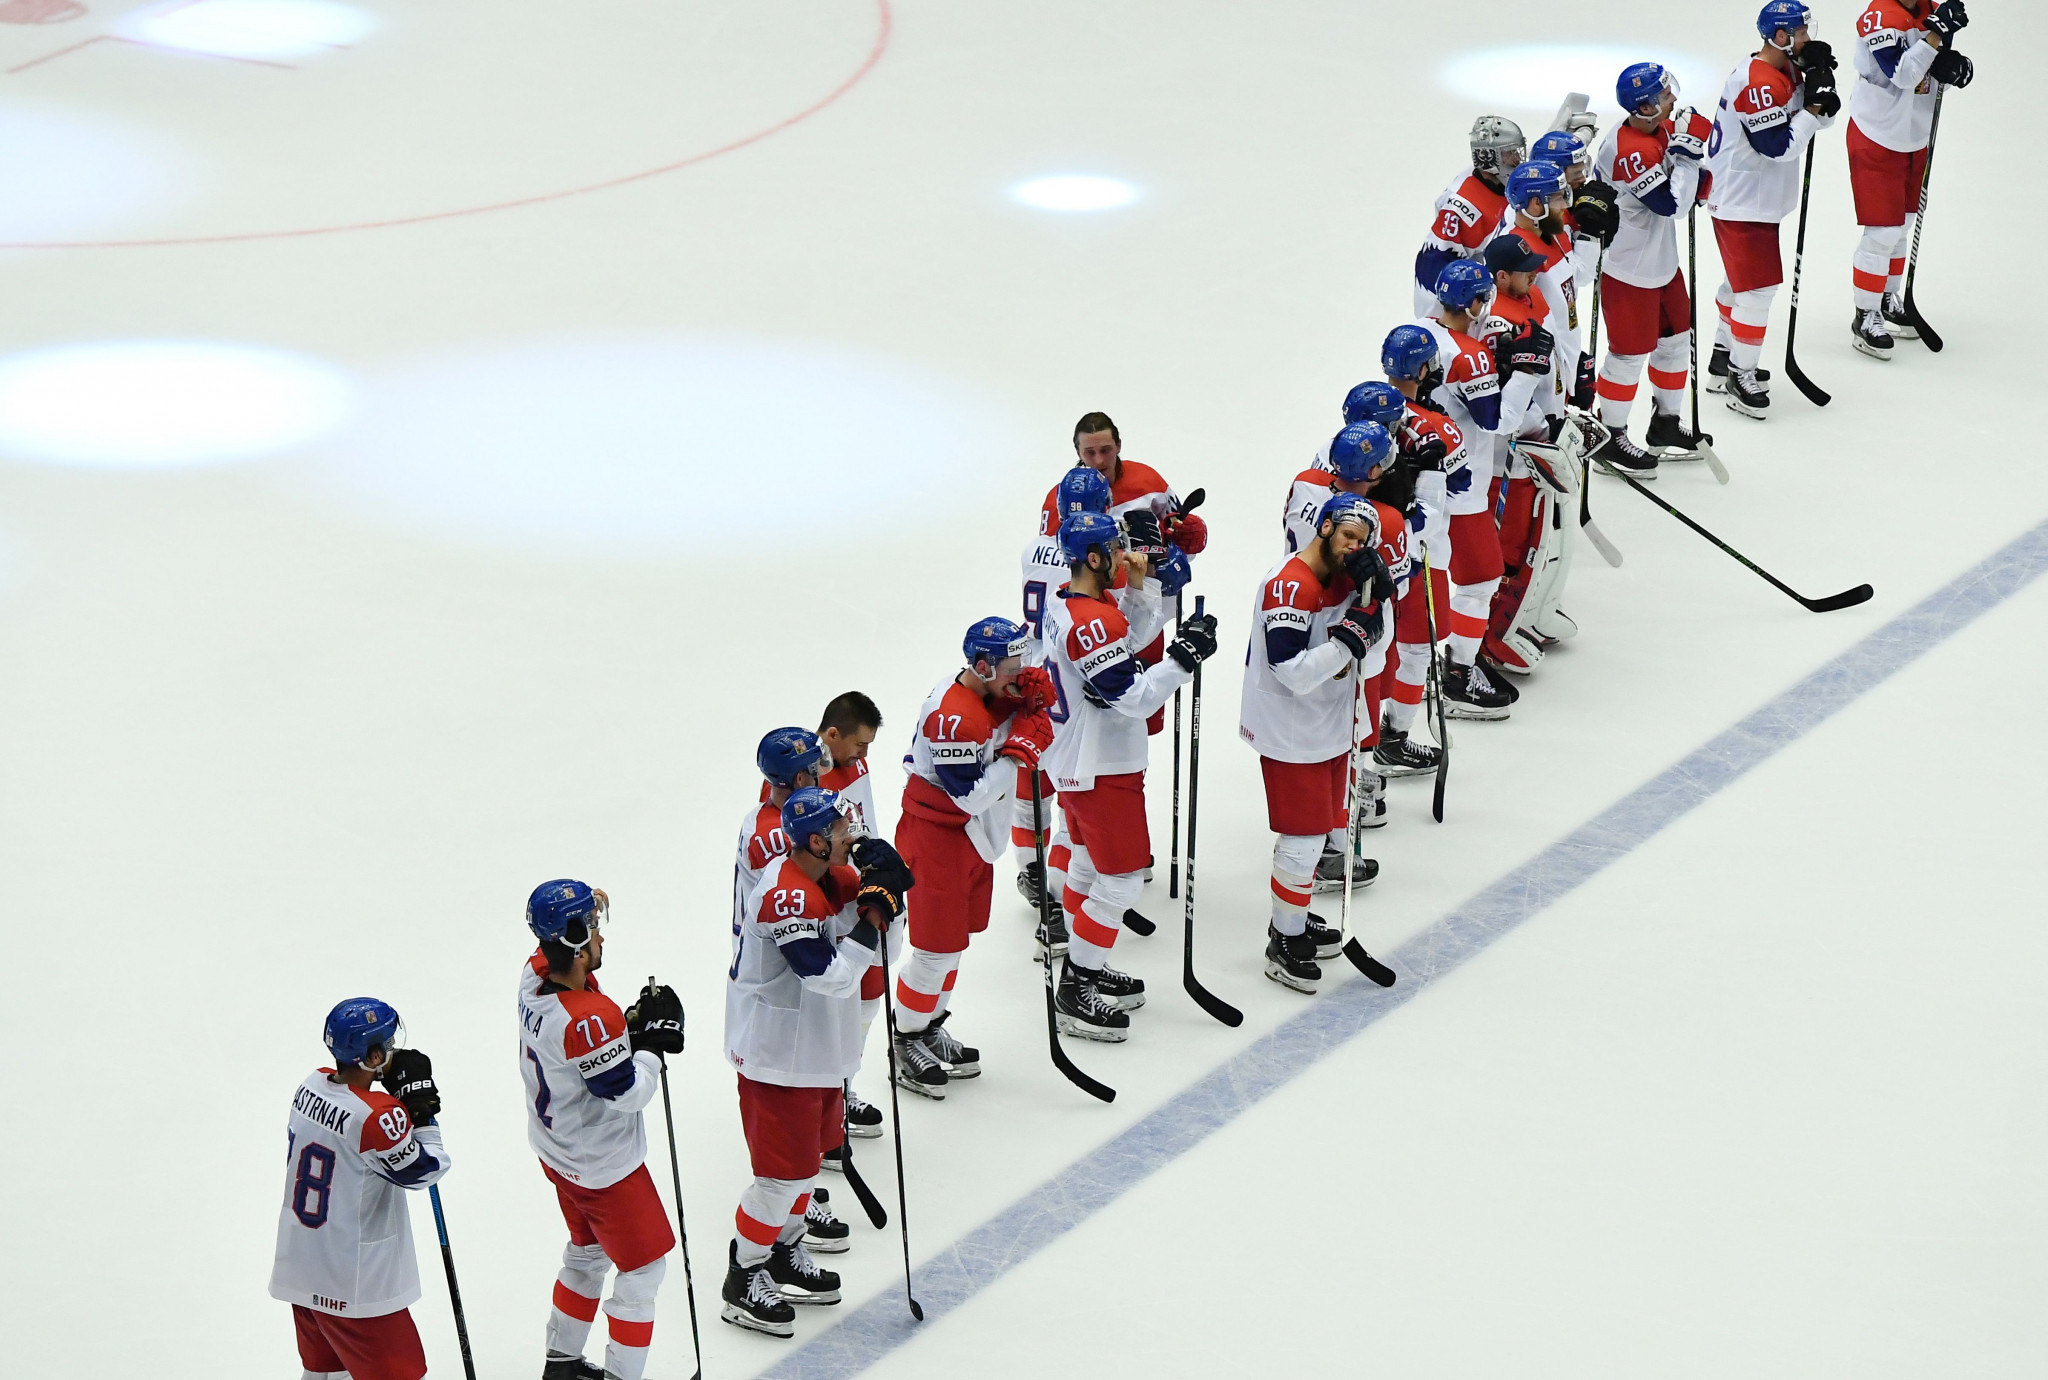 The Czech team reached the quarter finals at the World Championships in Denmark last month  ©Getty Images